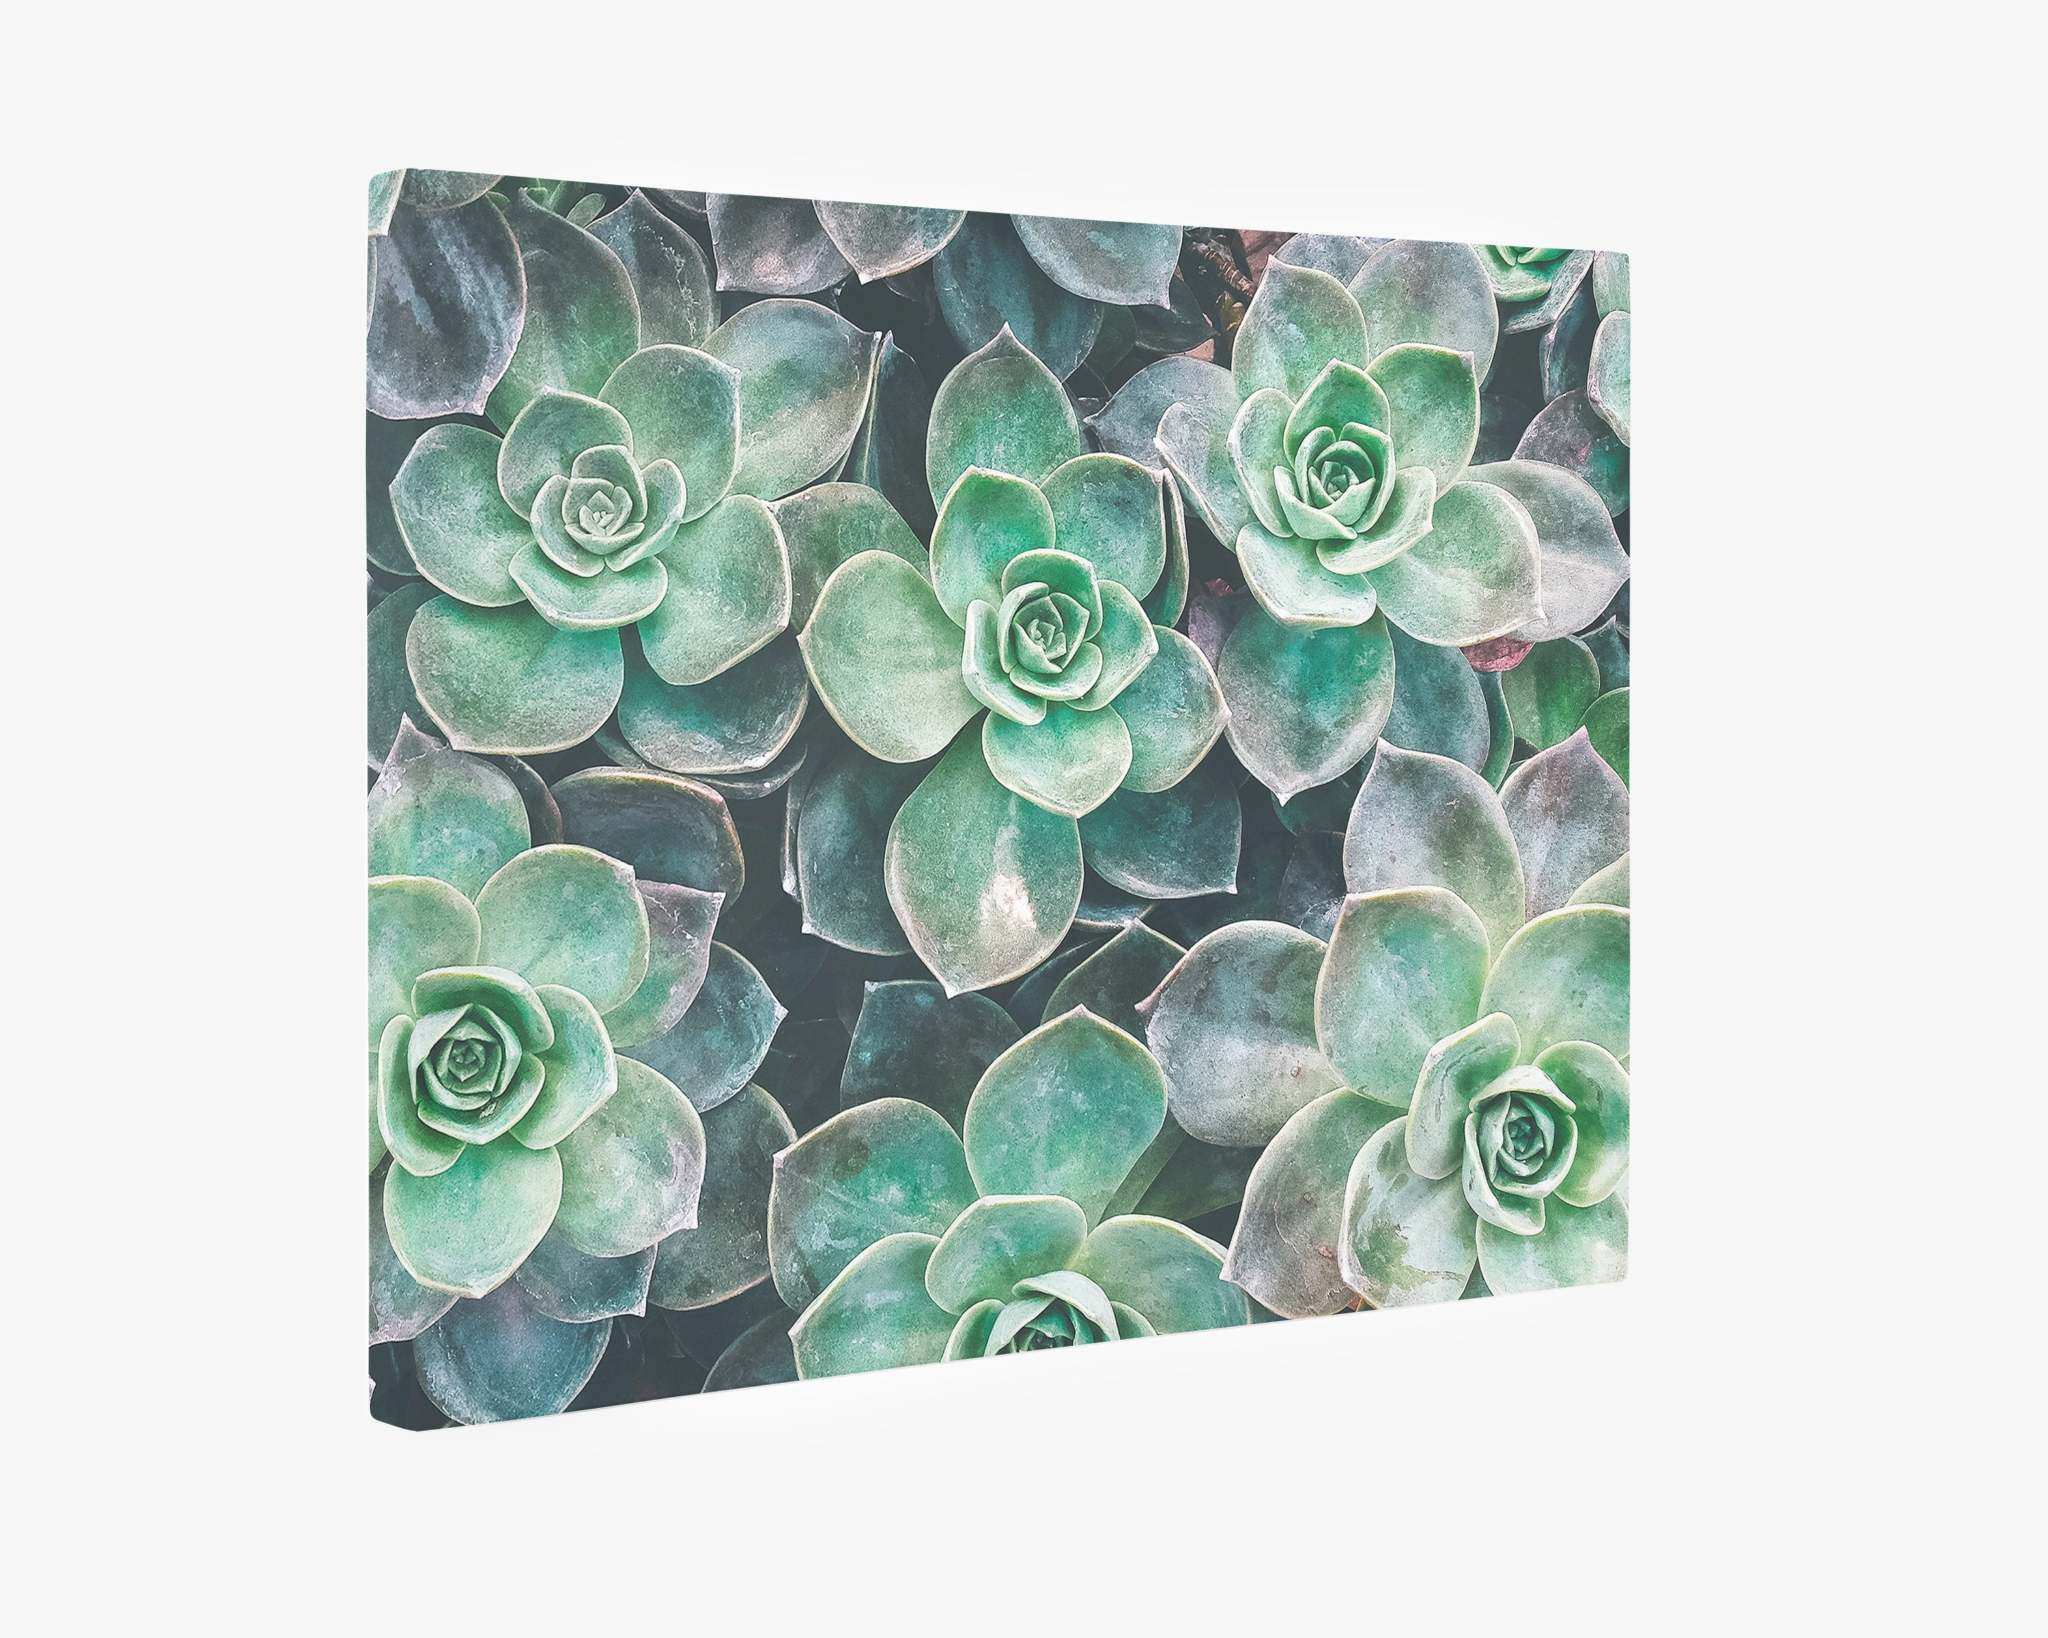 The Offley Green Fresh Green Succulent Canvas Wall Art, 'Bed of Succulents,' features a close-up of multiple green succulent plants. The succulents have rosette-shaped leaves with a slight pinkish hue on the edges, creating a calming and visually appealing pattern against a white background. This botanical print adds natural elegance to any space.